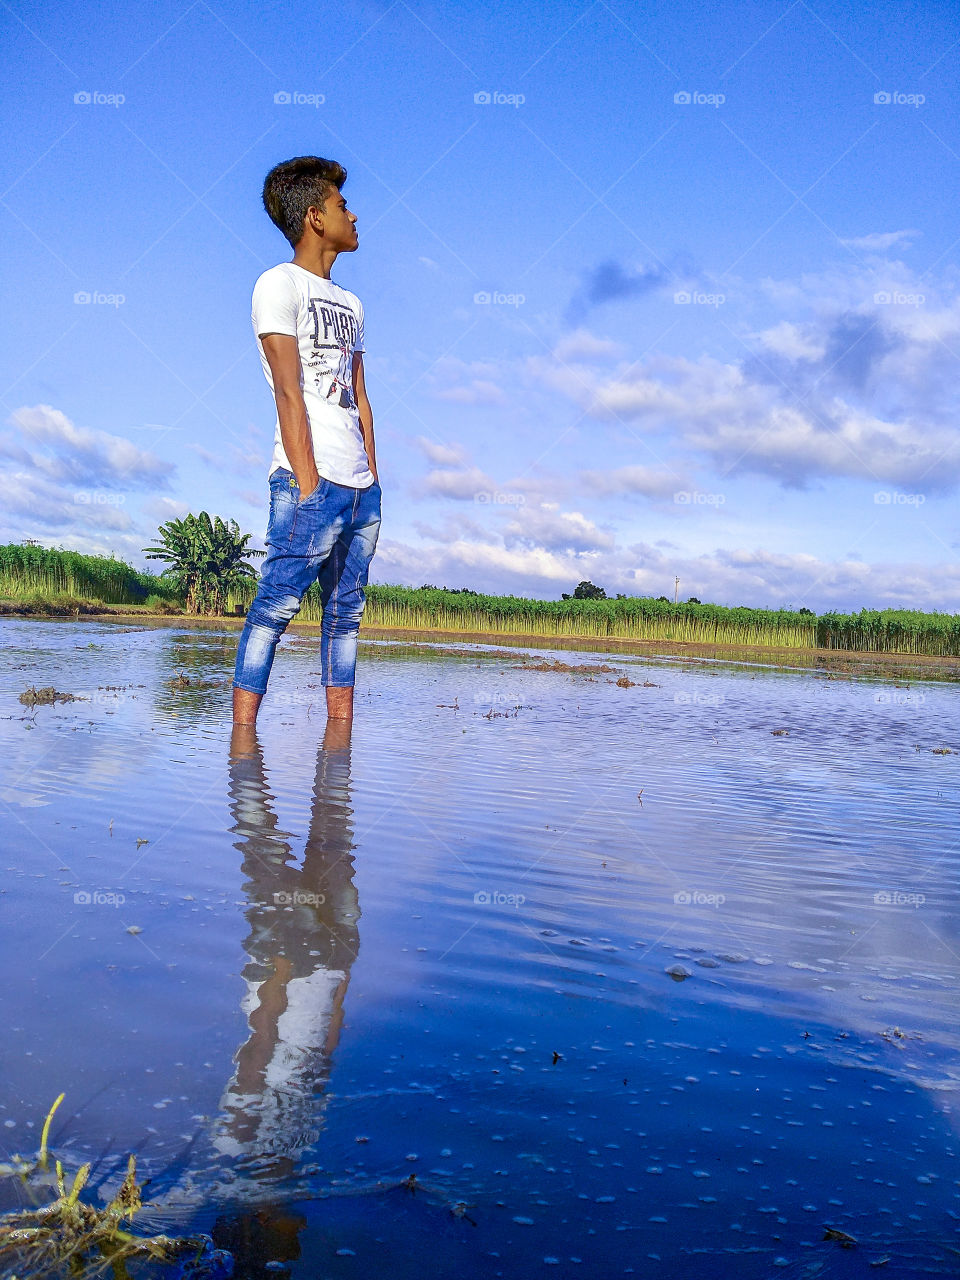 A boy stands in water. With a beautiful blue sky background. He is watching towards the sky.